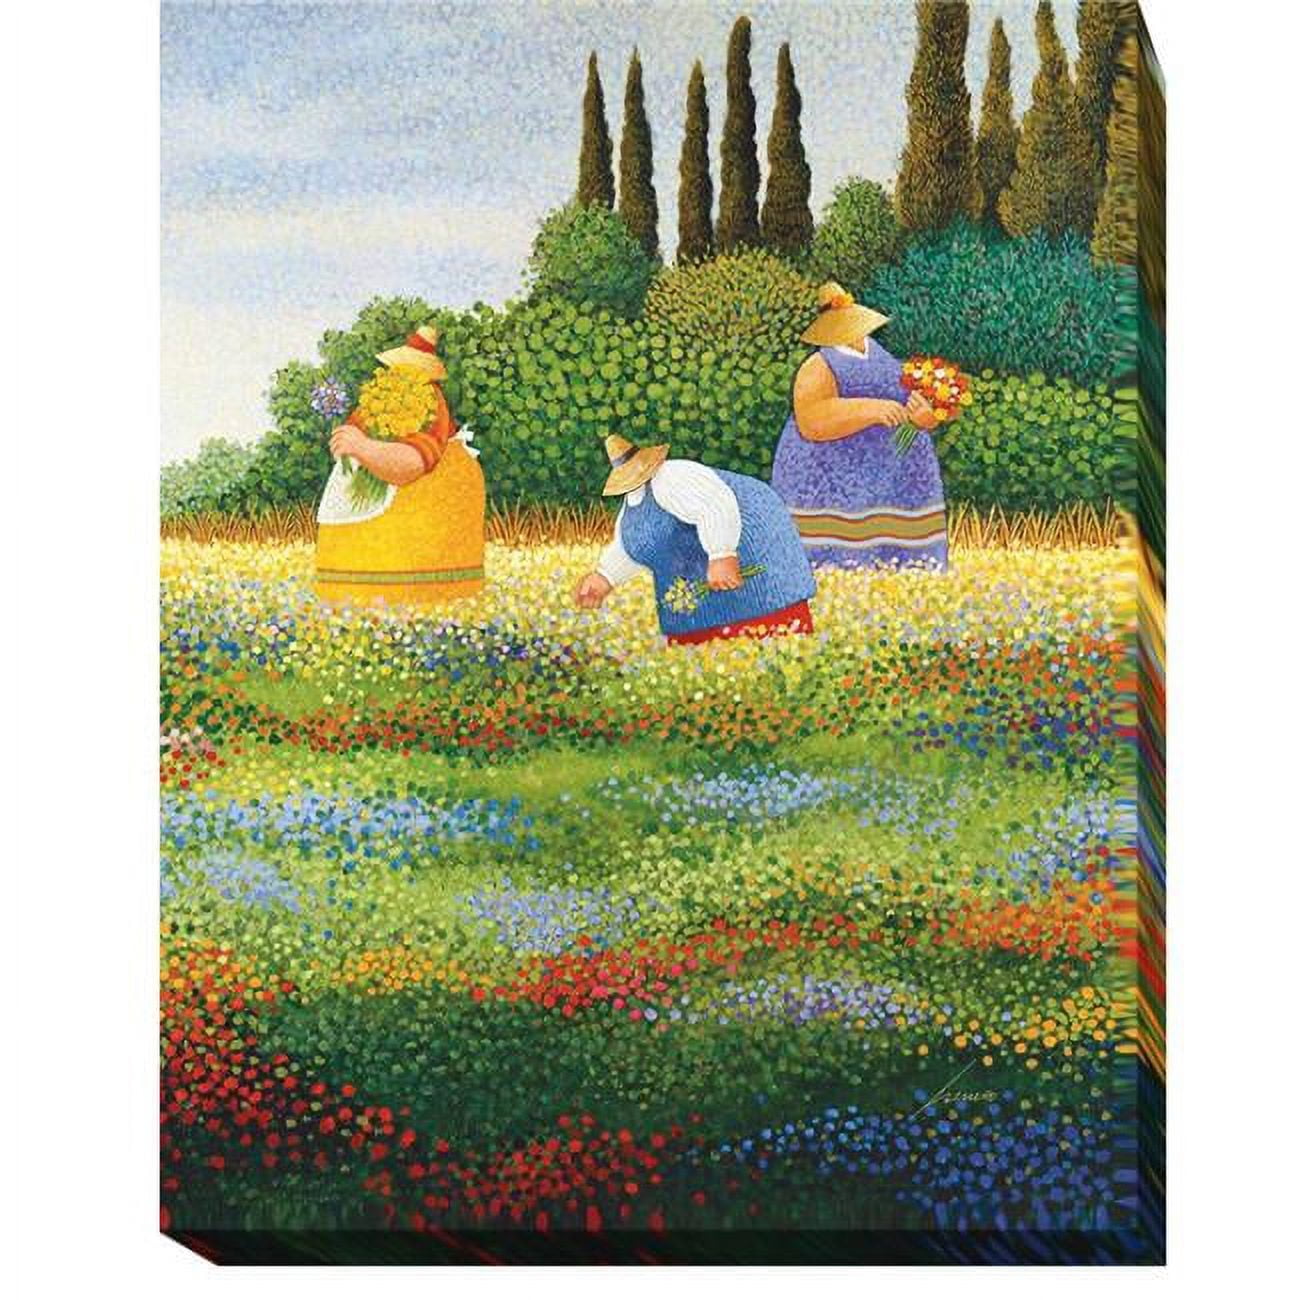 3040n394ig Spring Gathering By Lowell Herrero Premium Oversize Gallery-wrapped Canvas Giclee Art - 30 X 40 X 1.5 In.